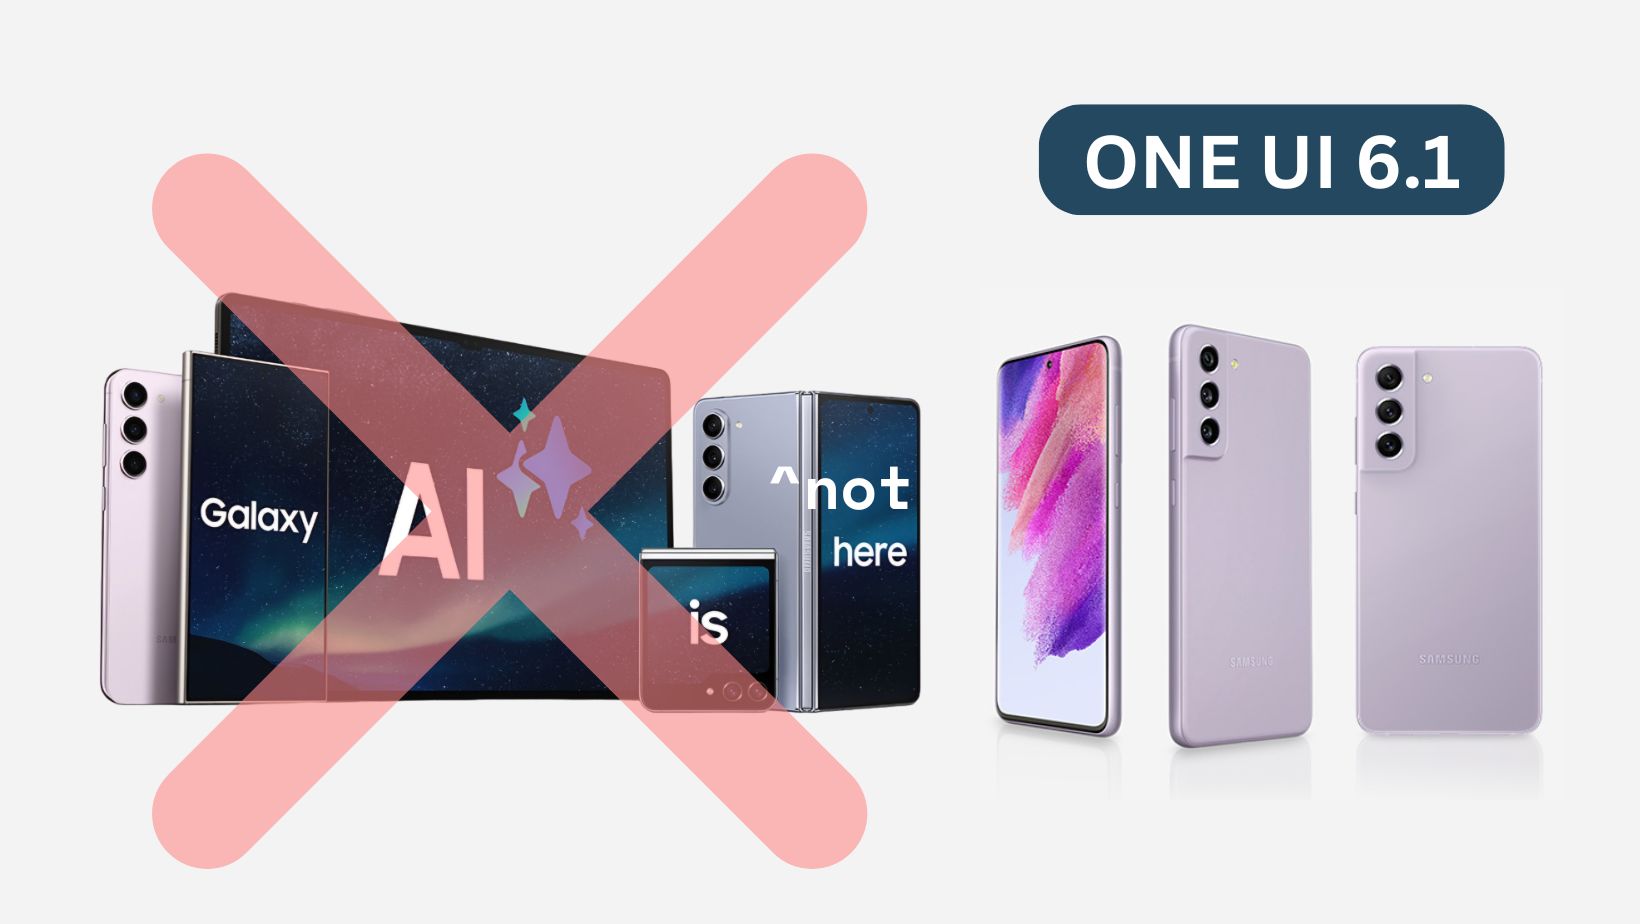 These Samsung Galaxy devices won’t get Galaxy AI features in One UI 6.1 firmware update